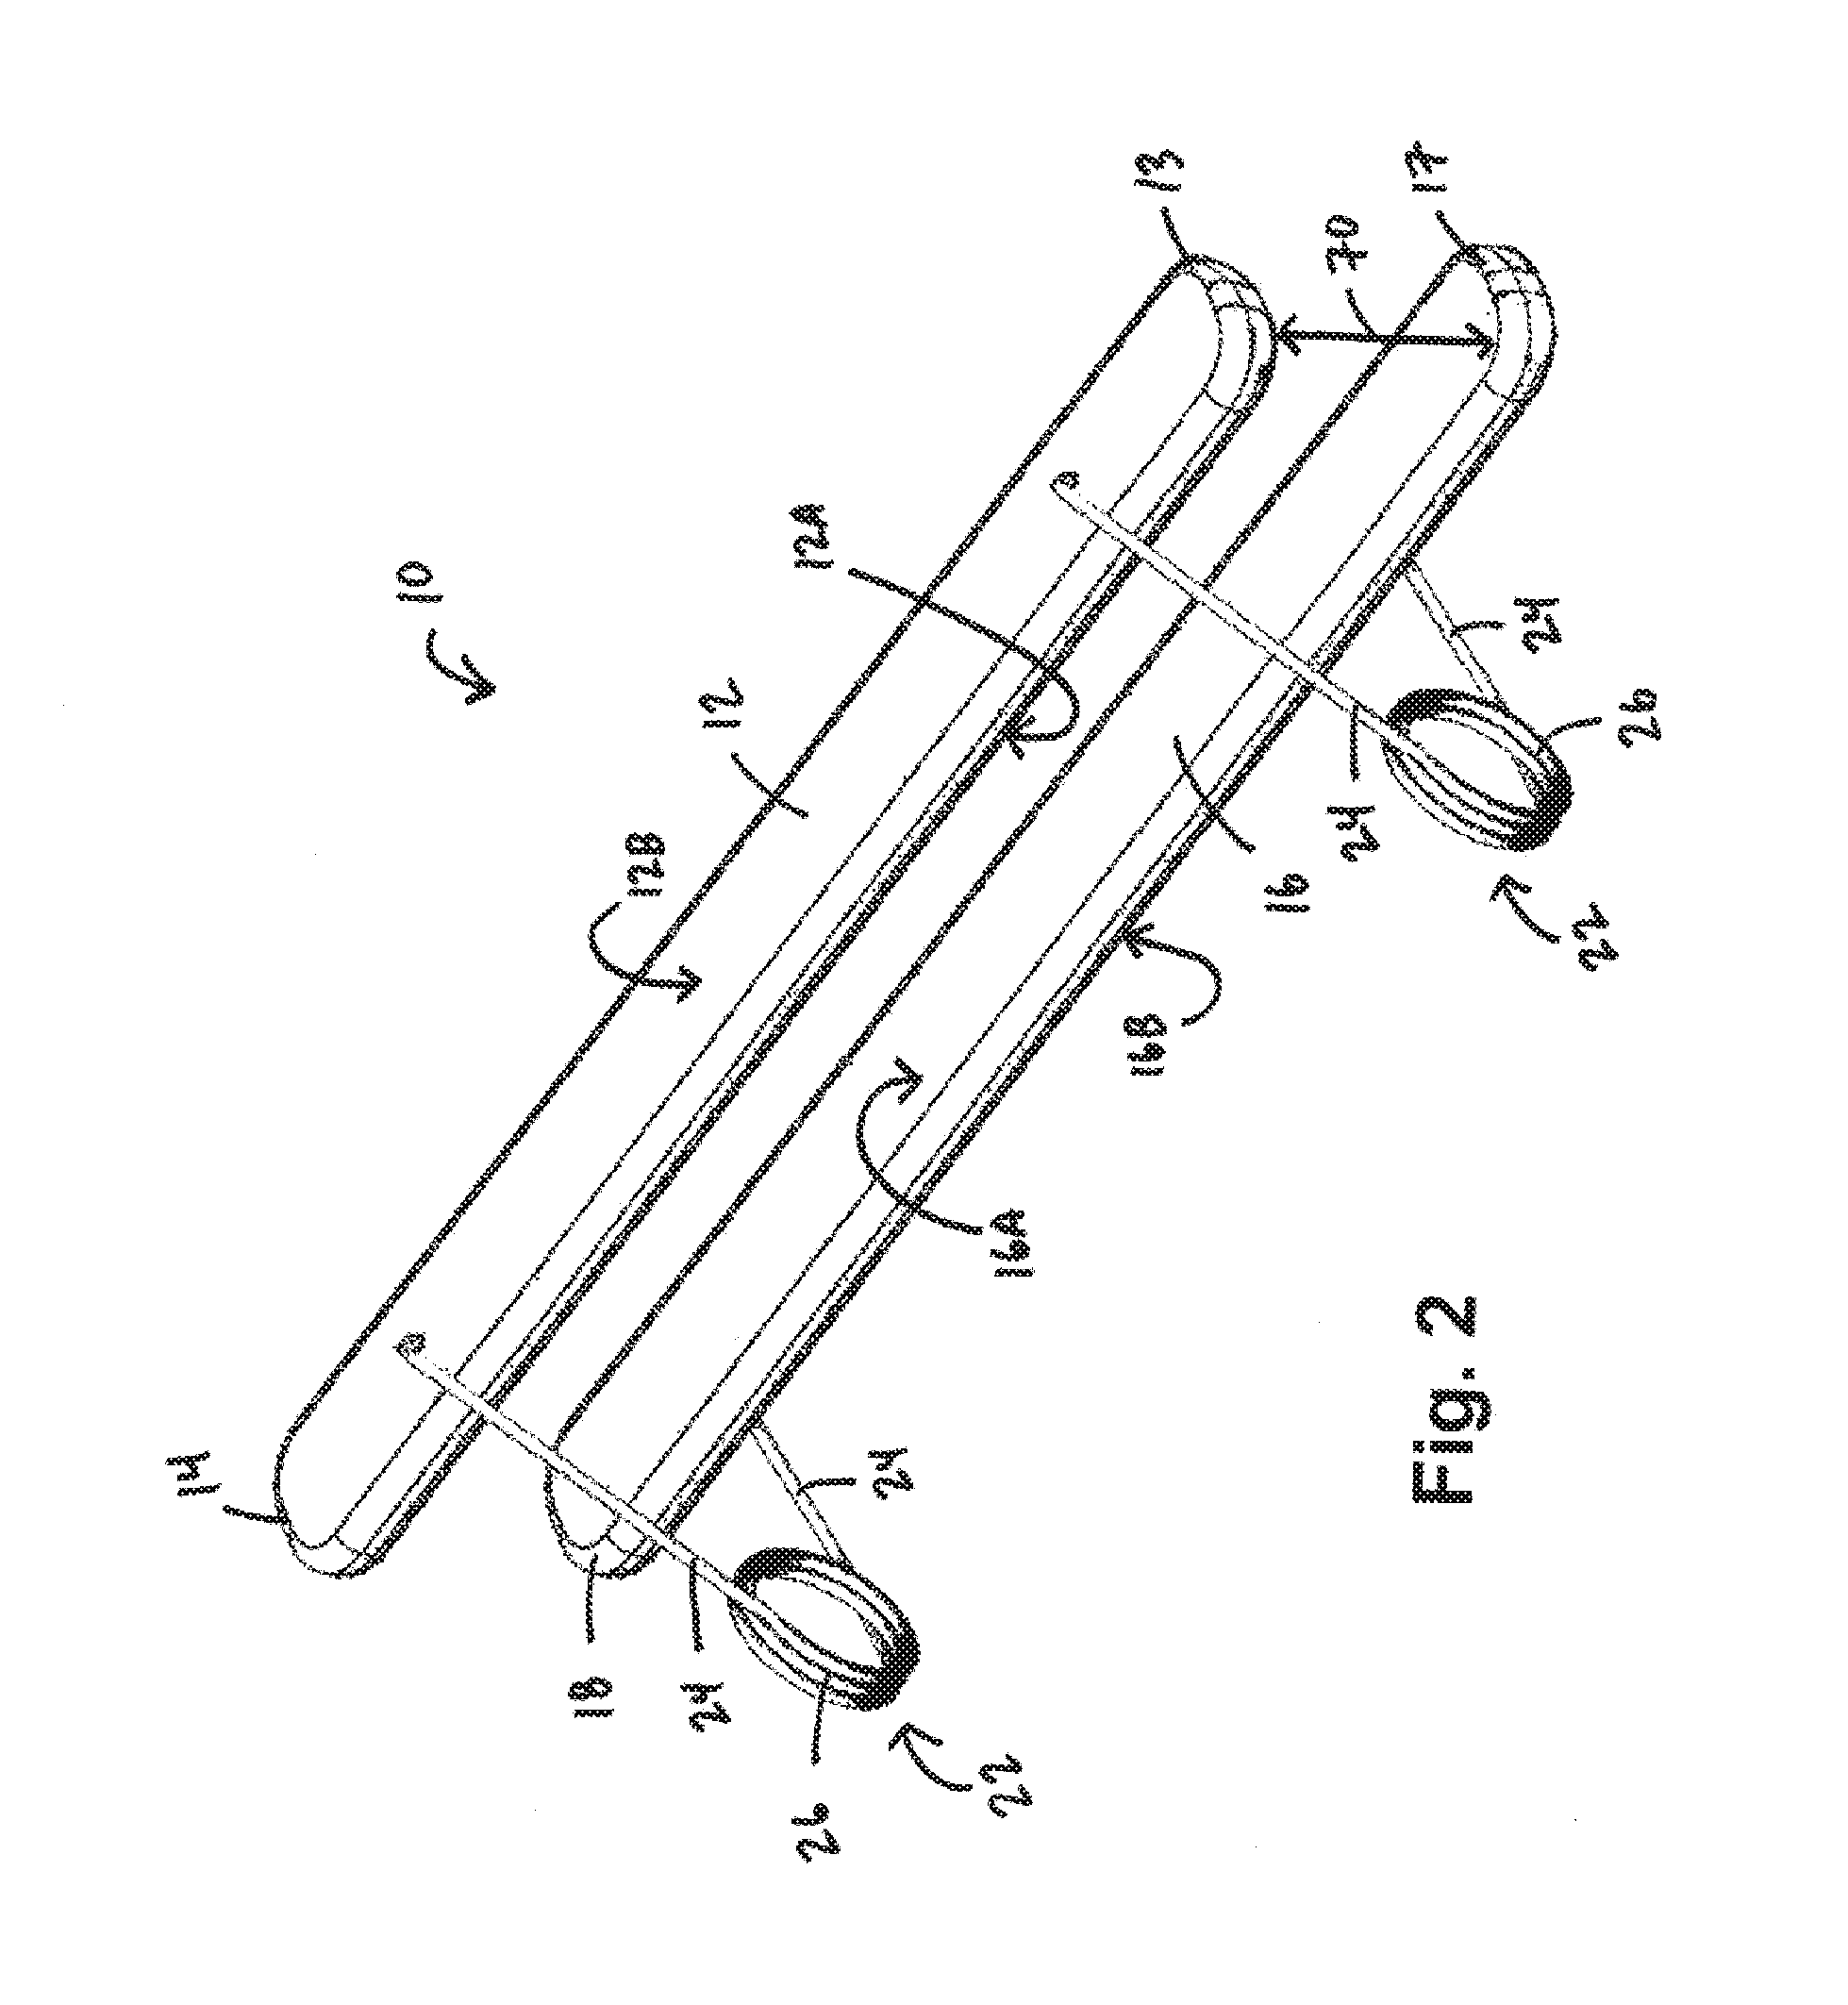 Devices, systems, and methods for engaging a tissue